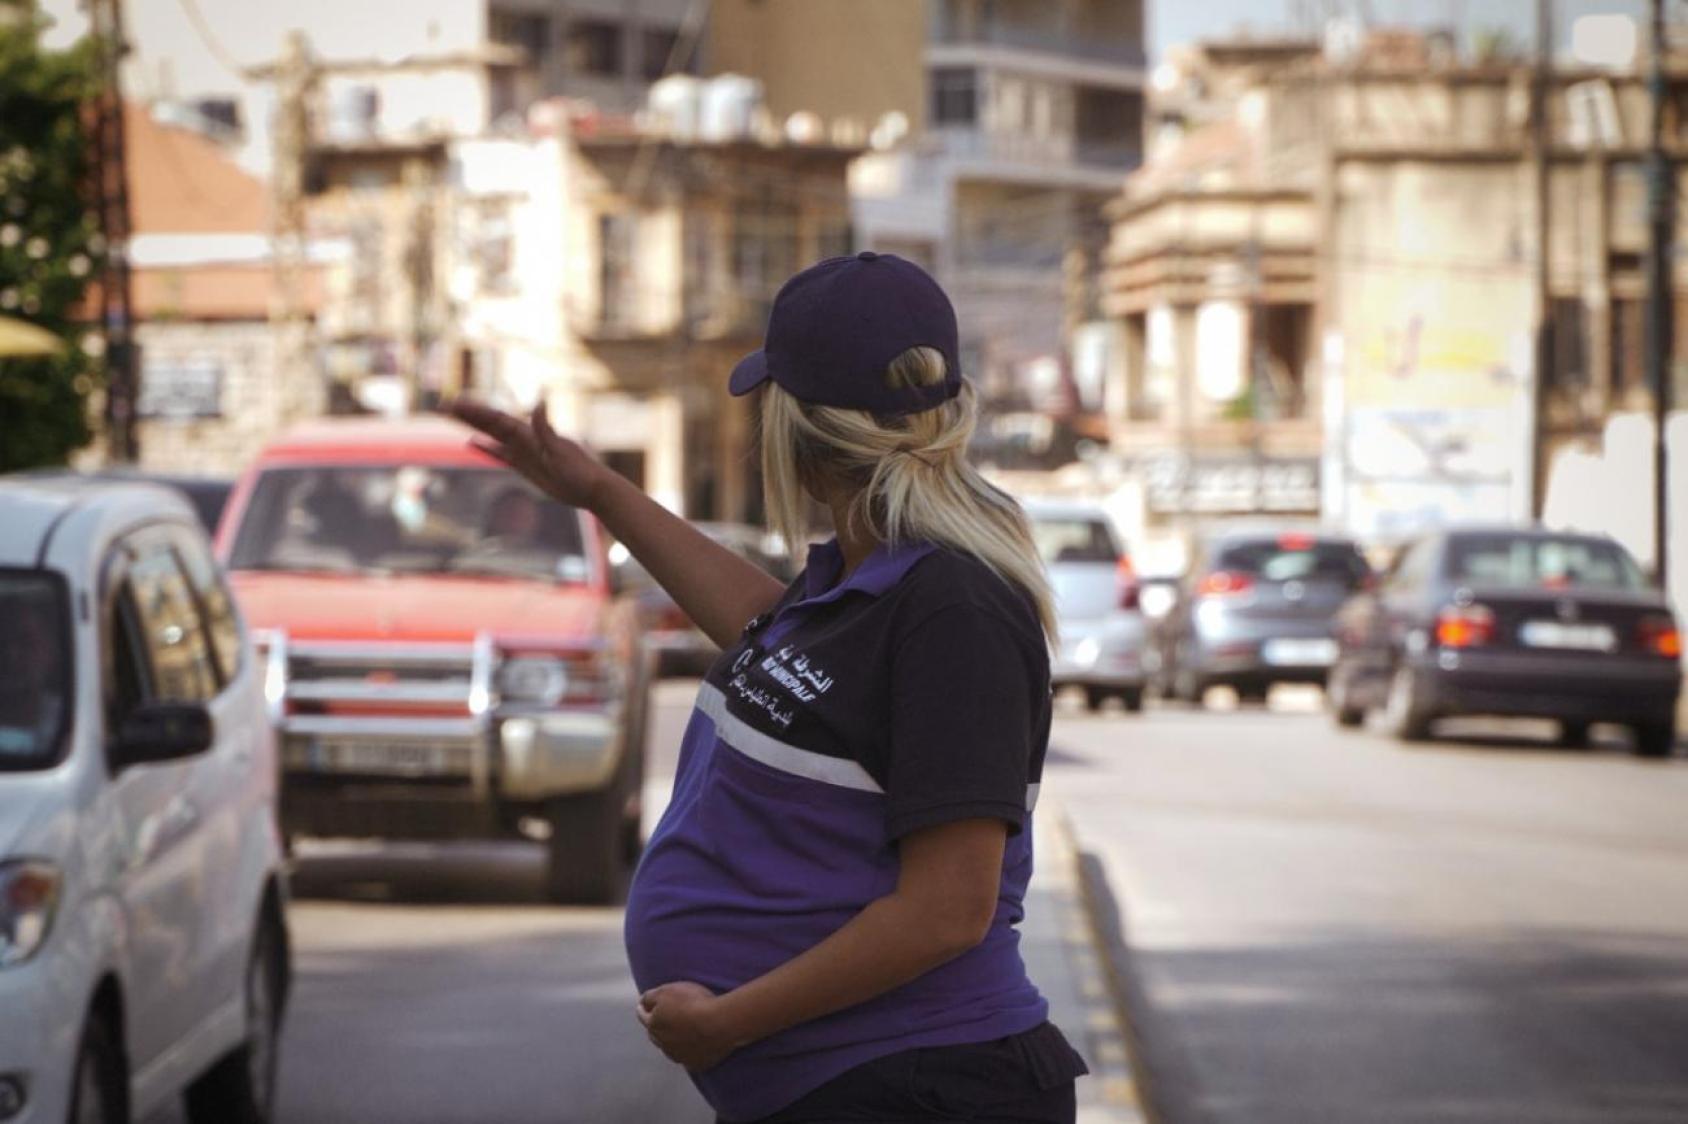 A heavily pregnant woman directs traffic in the street. 